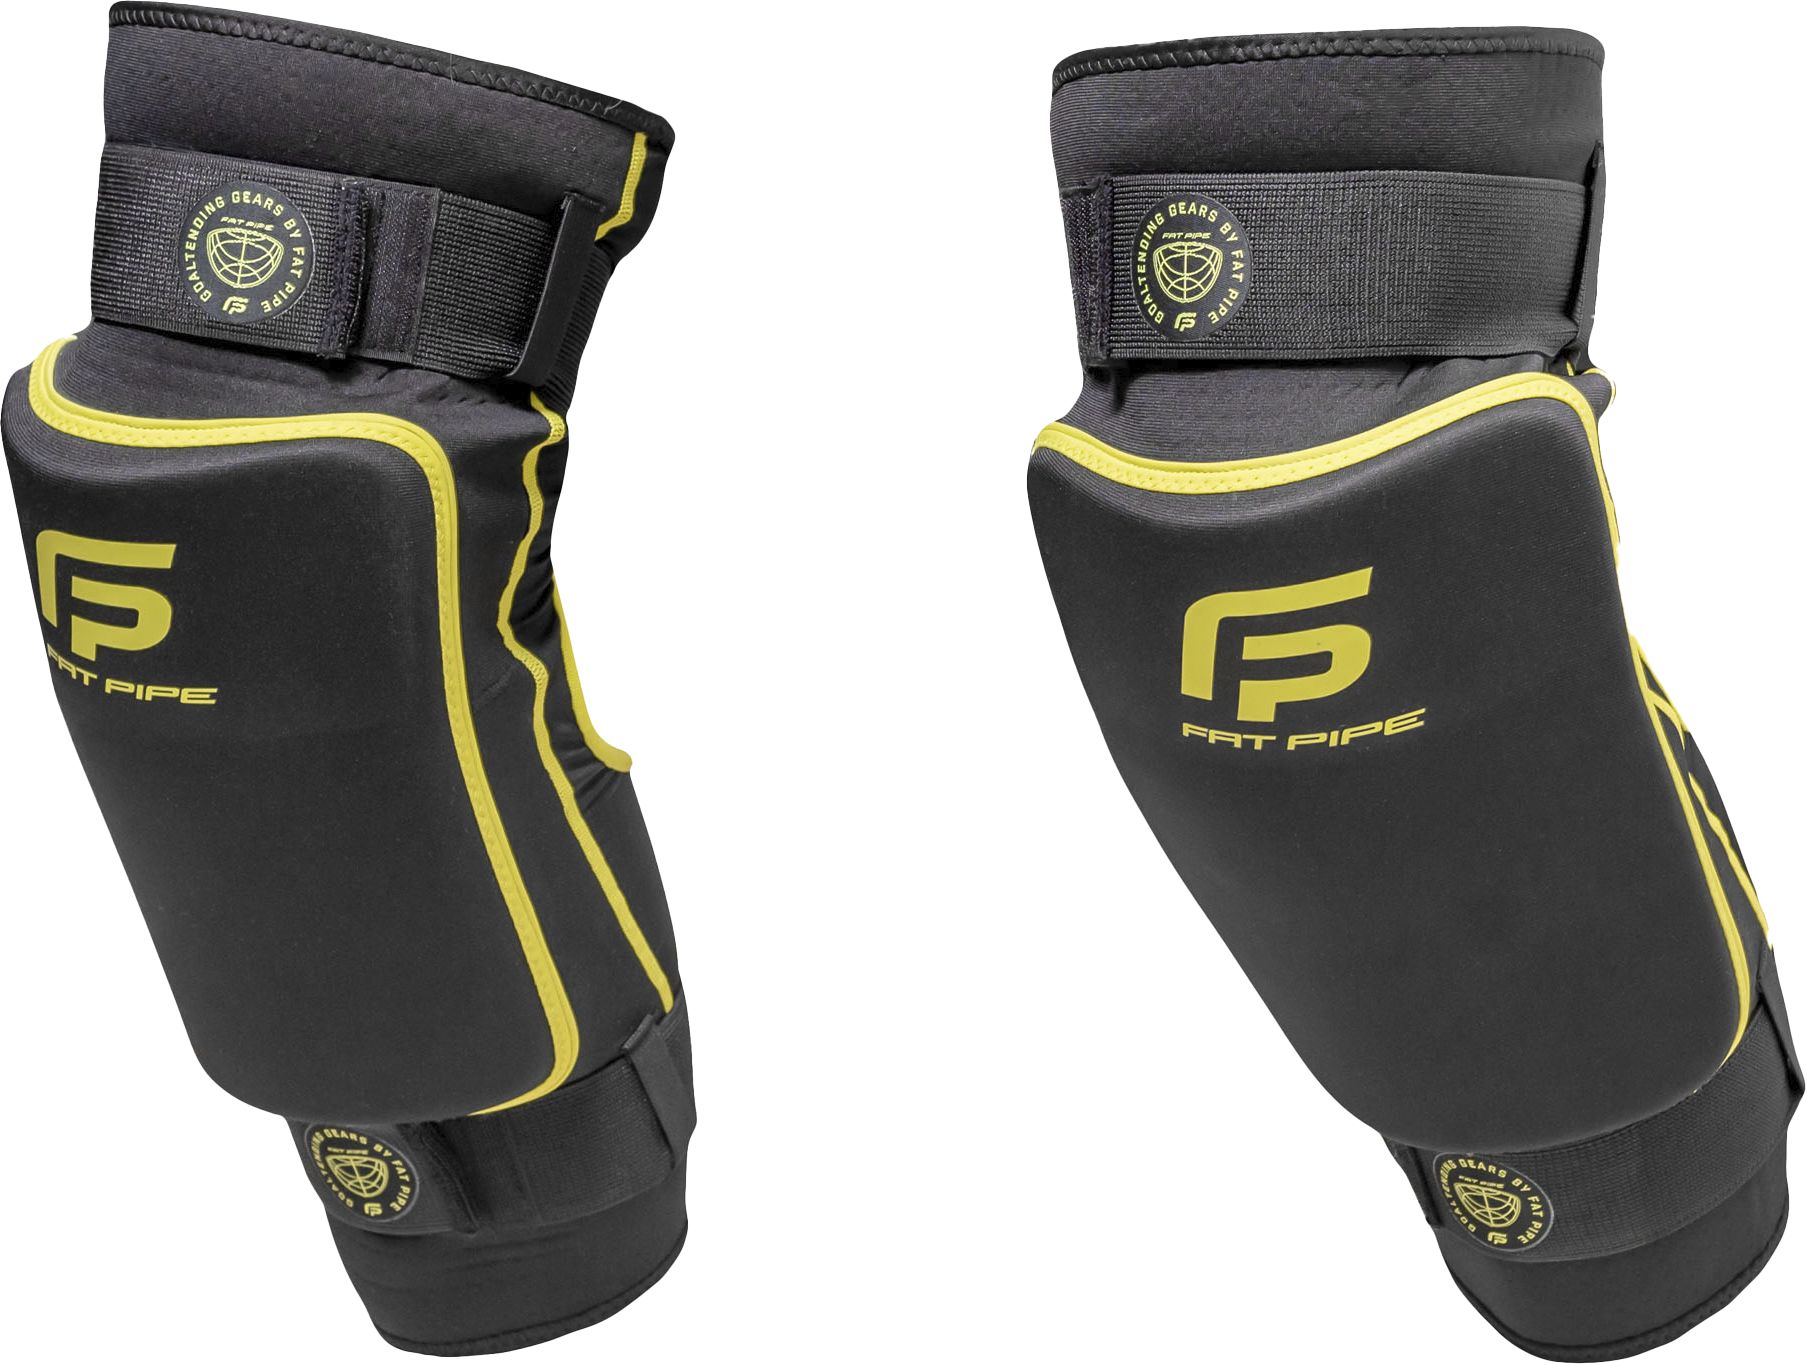 FATPIPE, VIC GK KNEEPADS